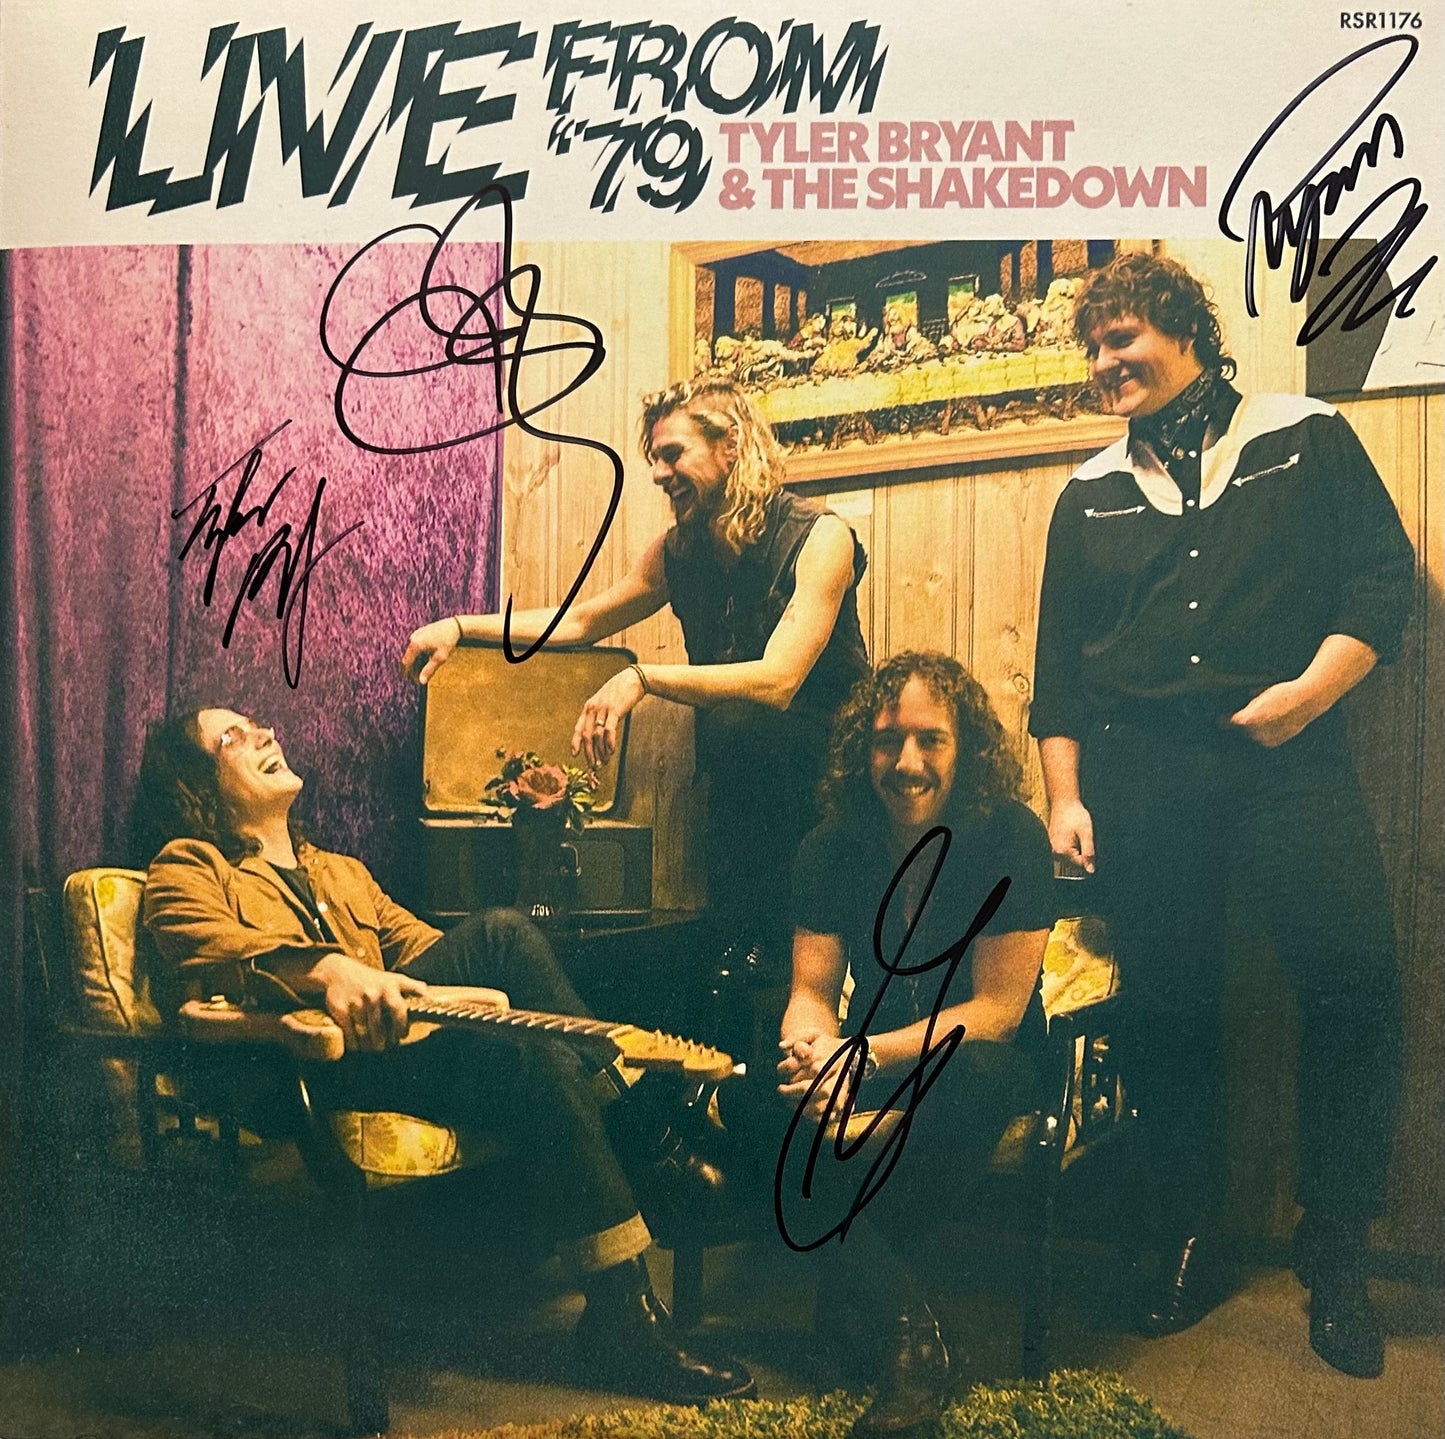 Tyler Bryant and The Shakedown - Live From '79 Autographed Purple Swirl Vinyl LP